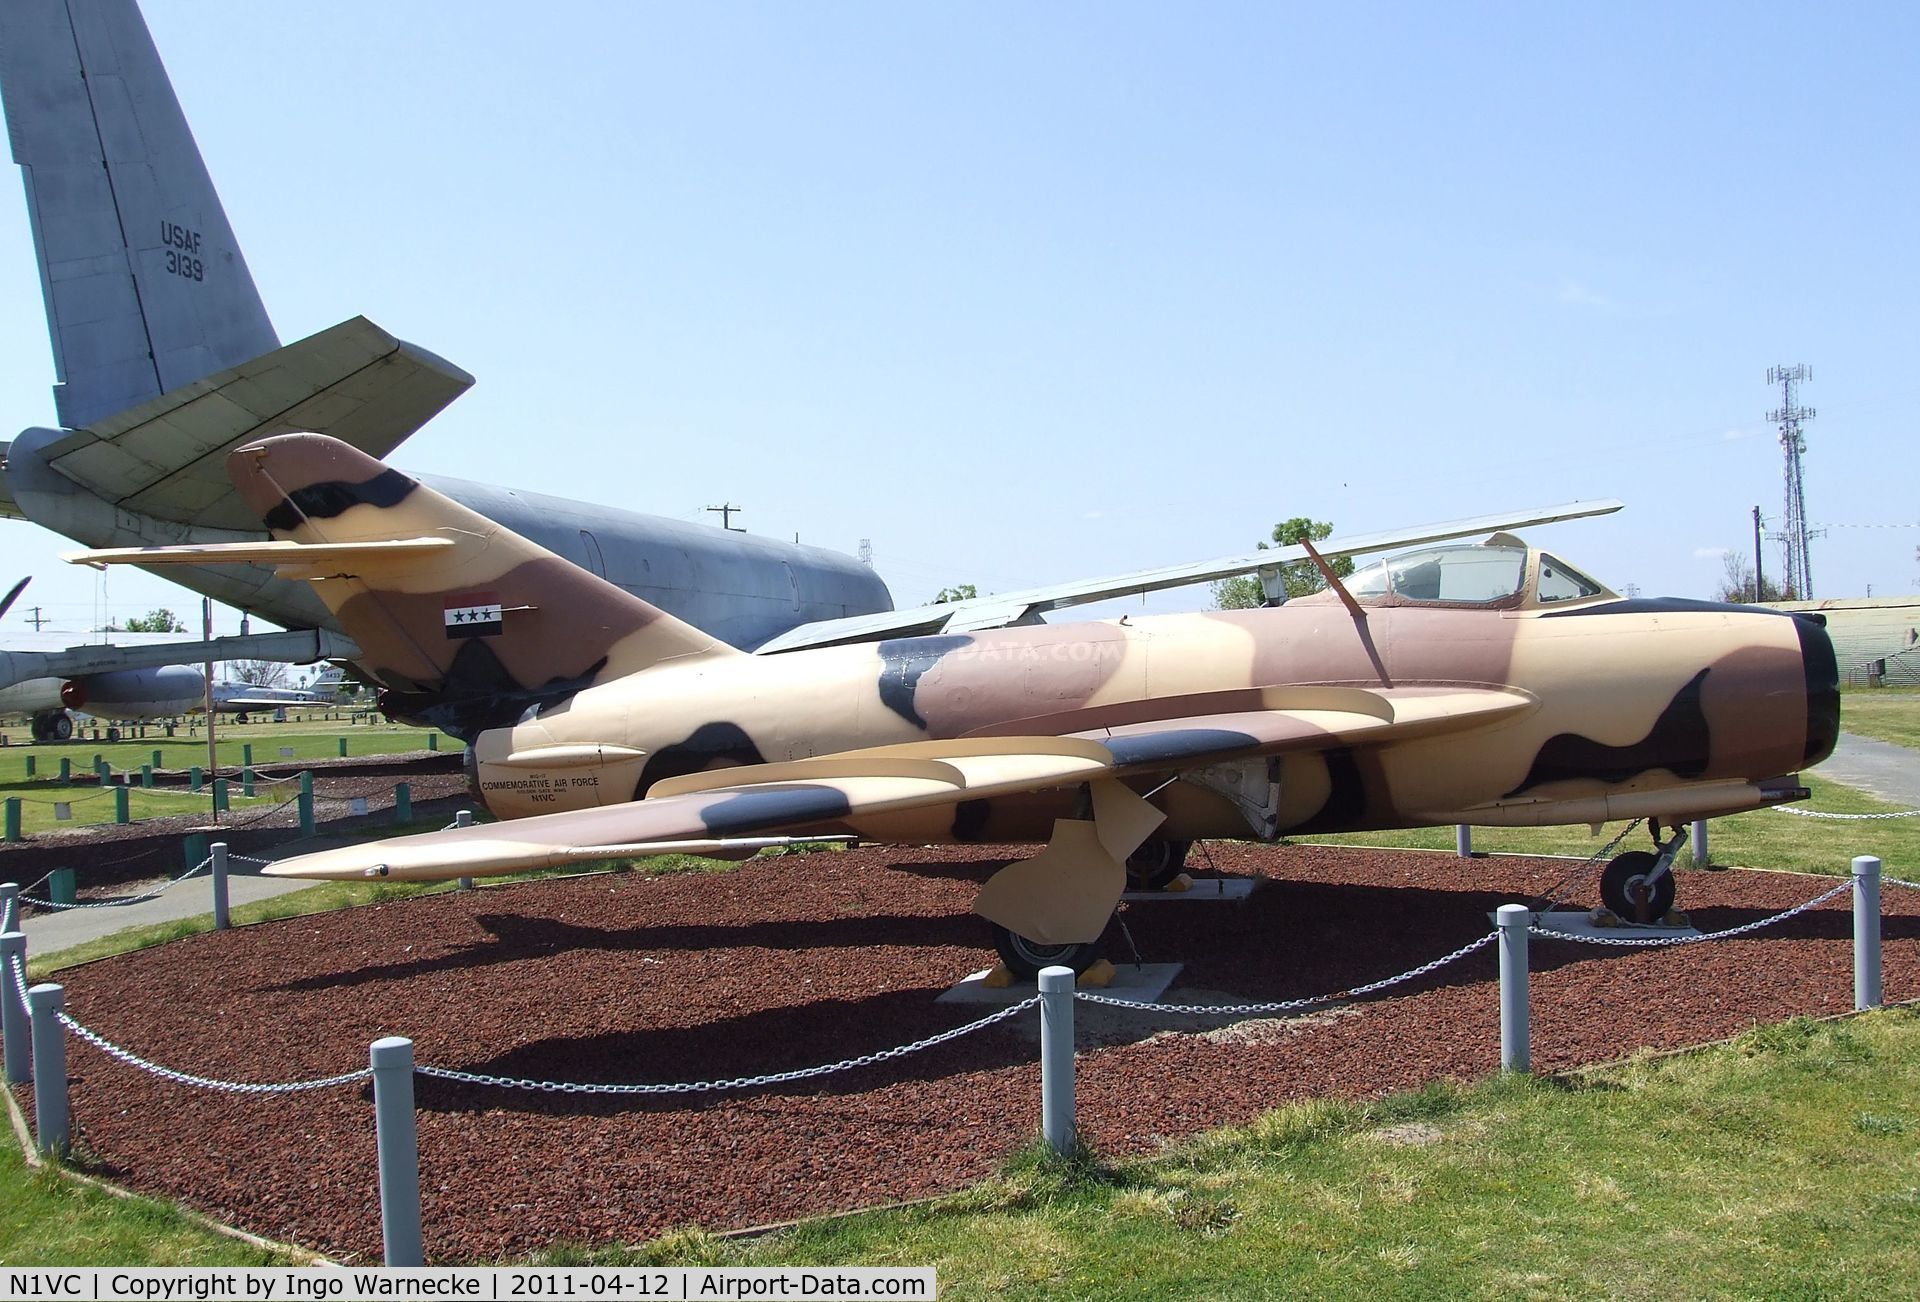 N1VC, 1956 Shenyang F4 C/N 2705, Shenyang J-5 (F-5) (MiG-17F FRESCO-C) at the Castle Air Museum, Atwater CA